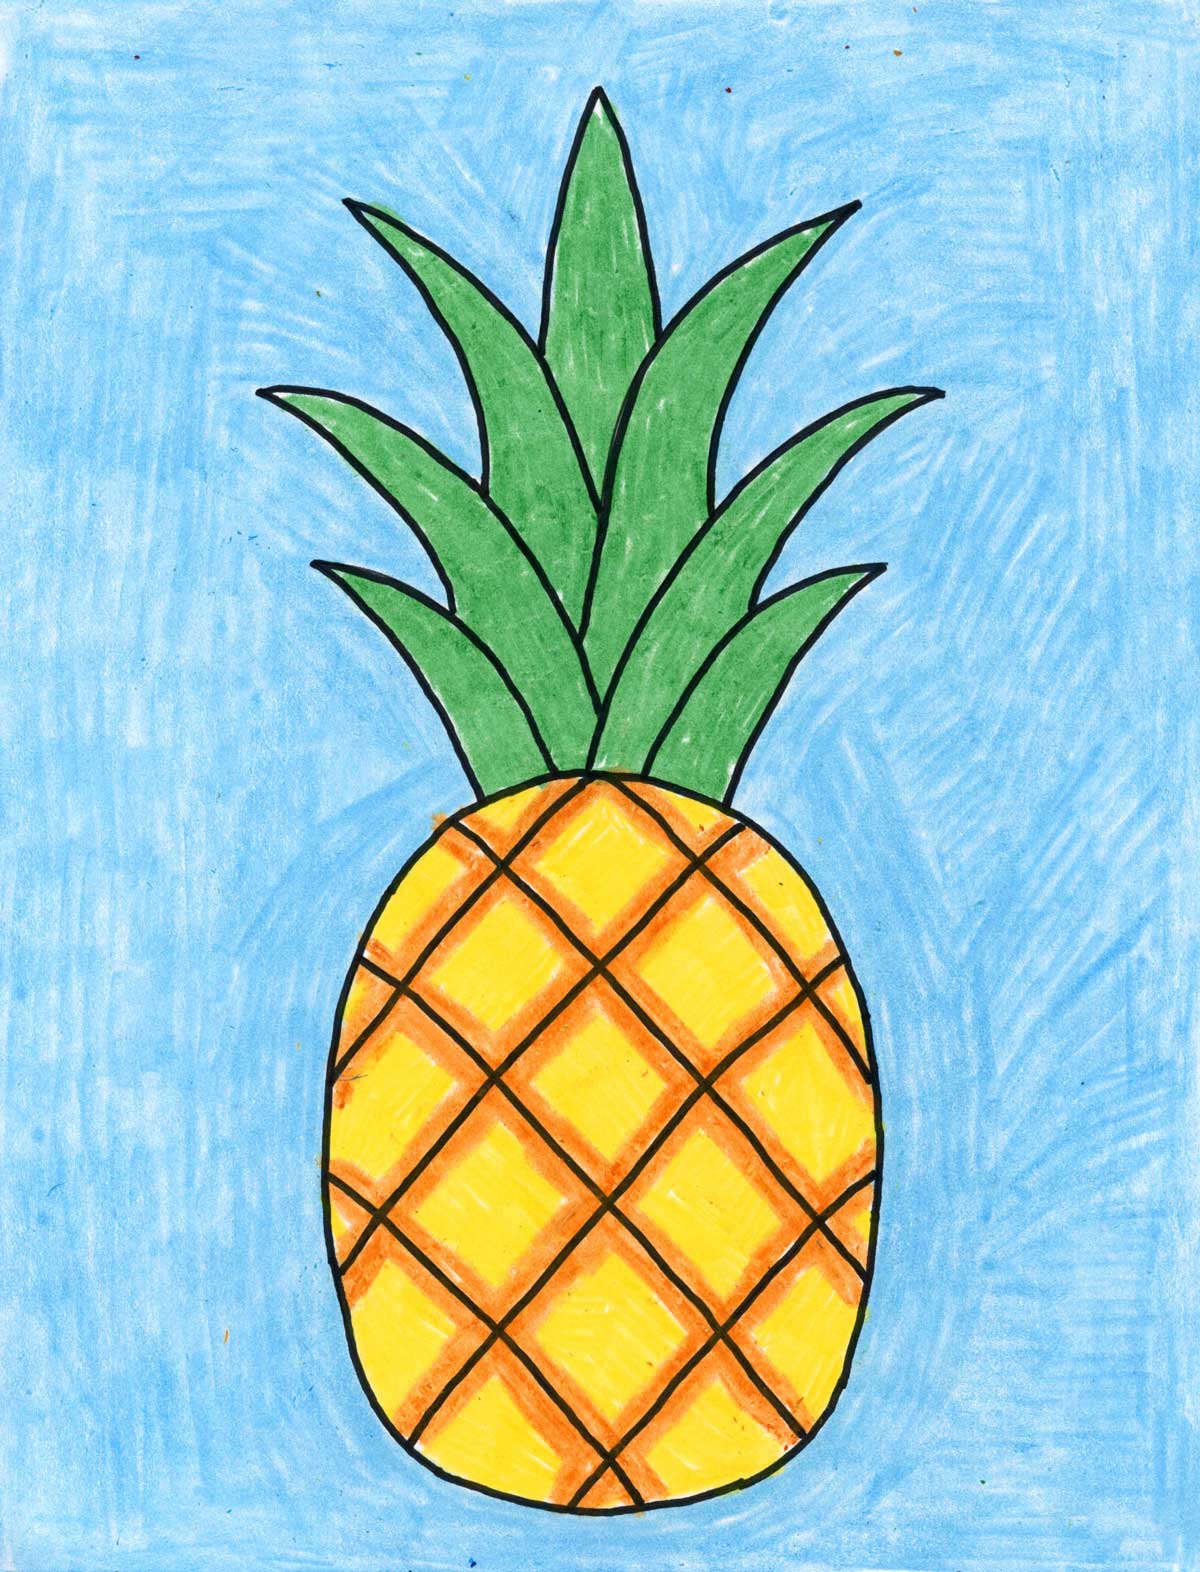 How to Draw a Pineapple: Easy Step-by-Step Drawing